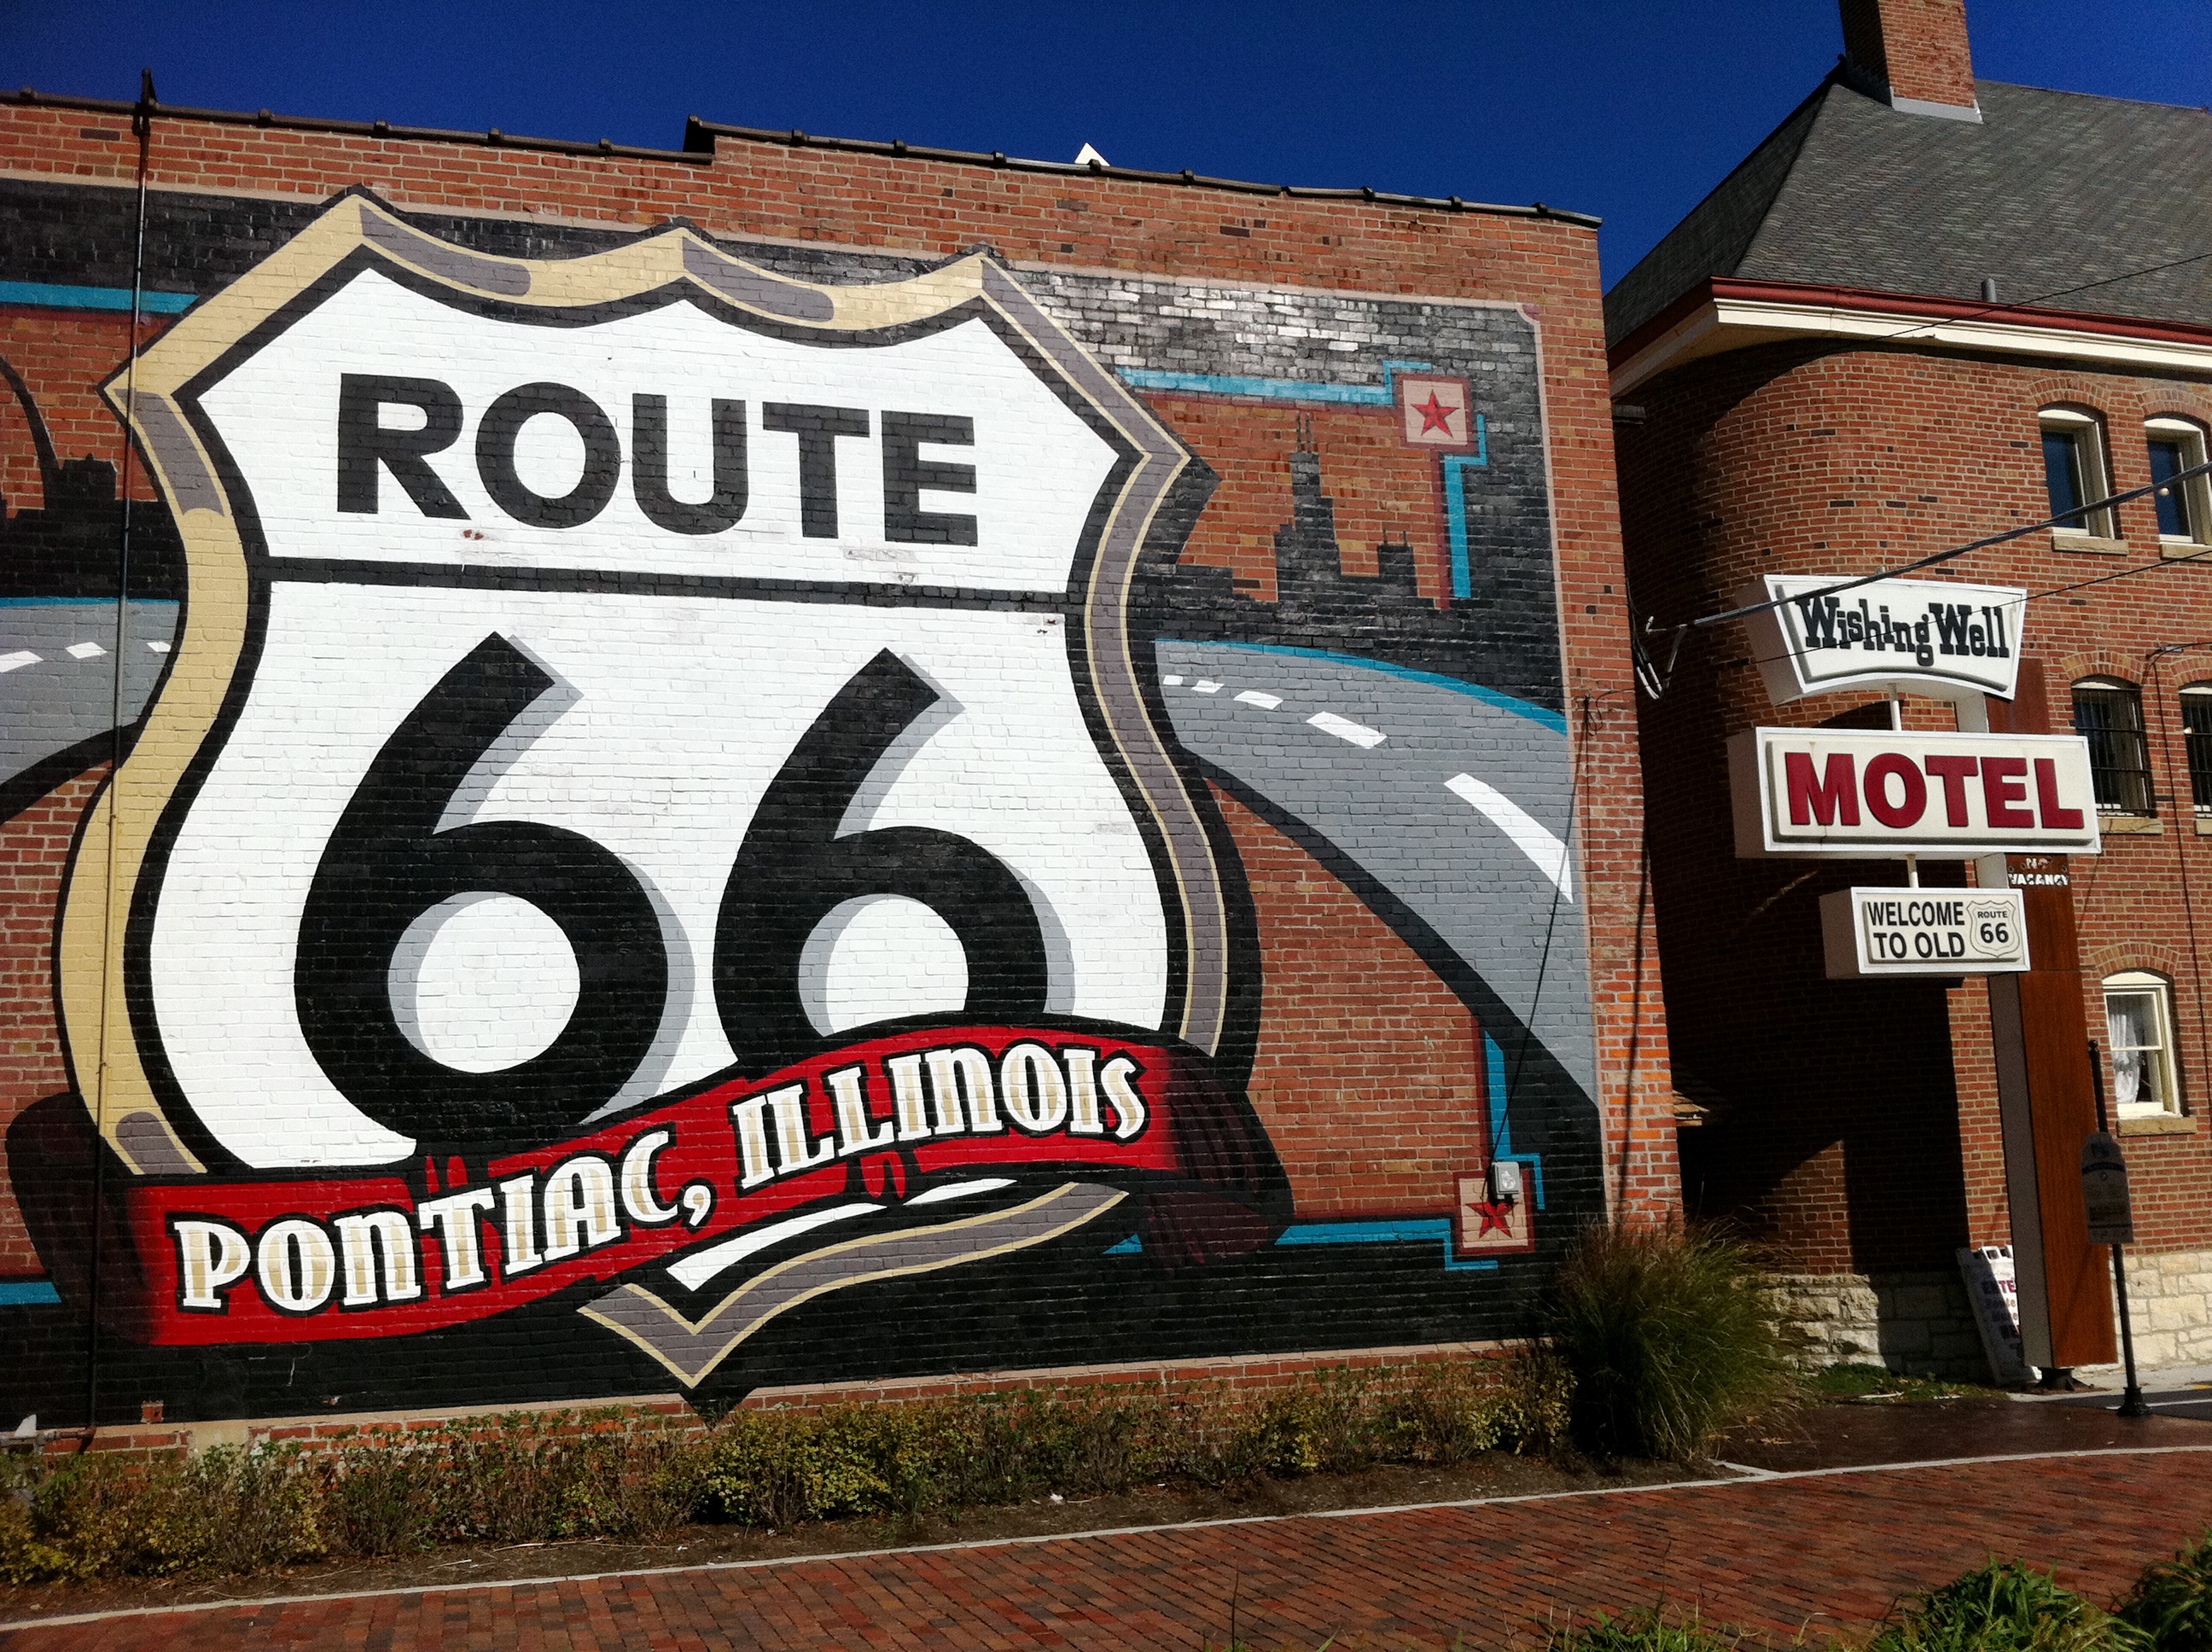 History Revisited on Route 66